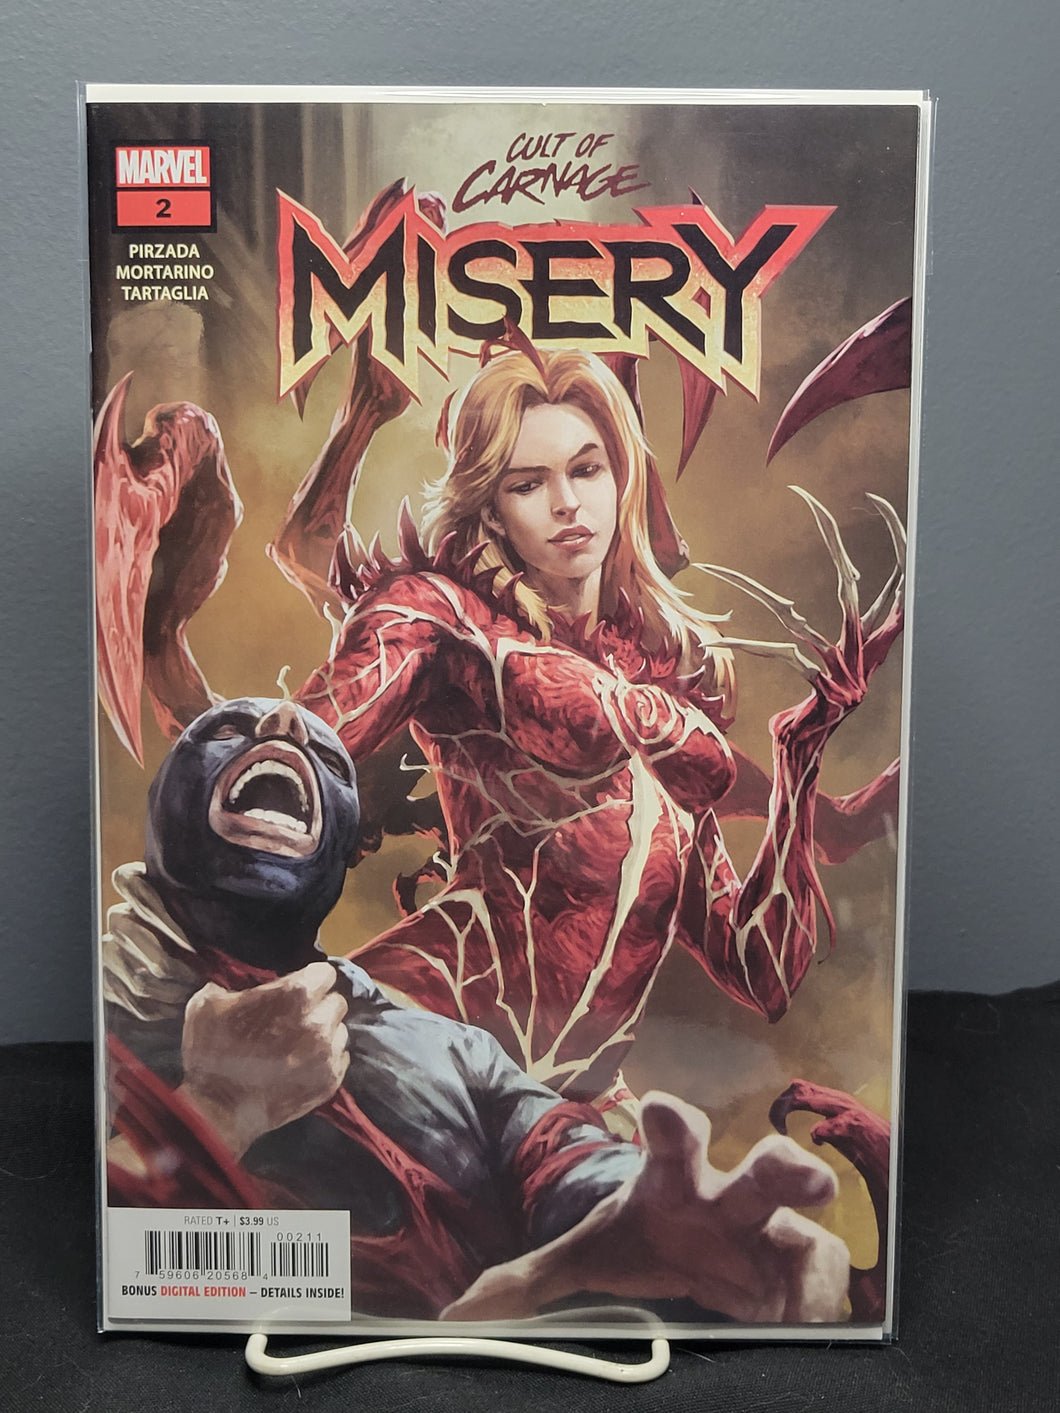 Cult Of Carnage Misery #2